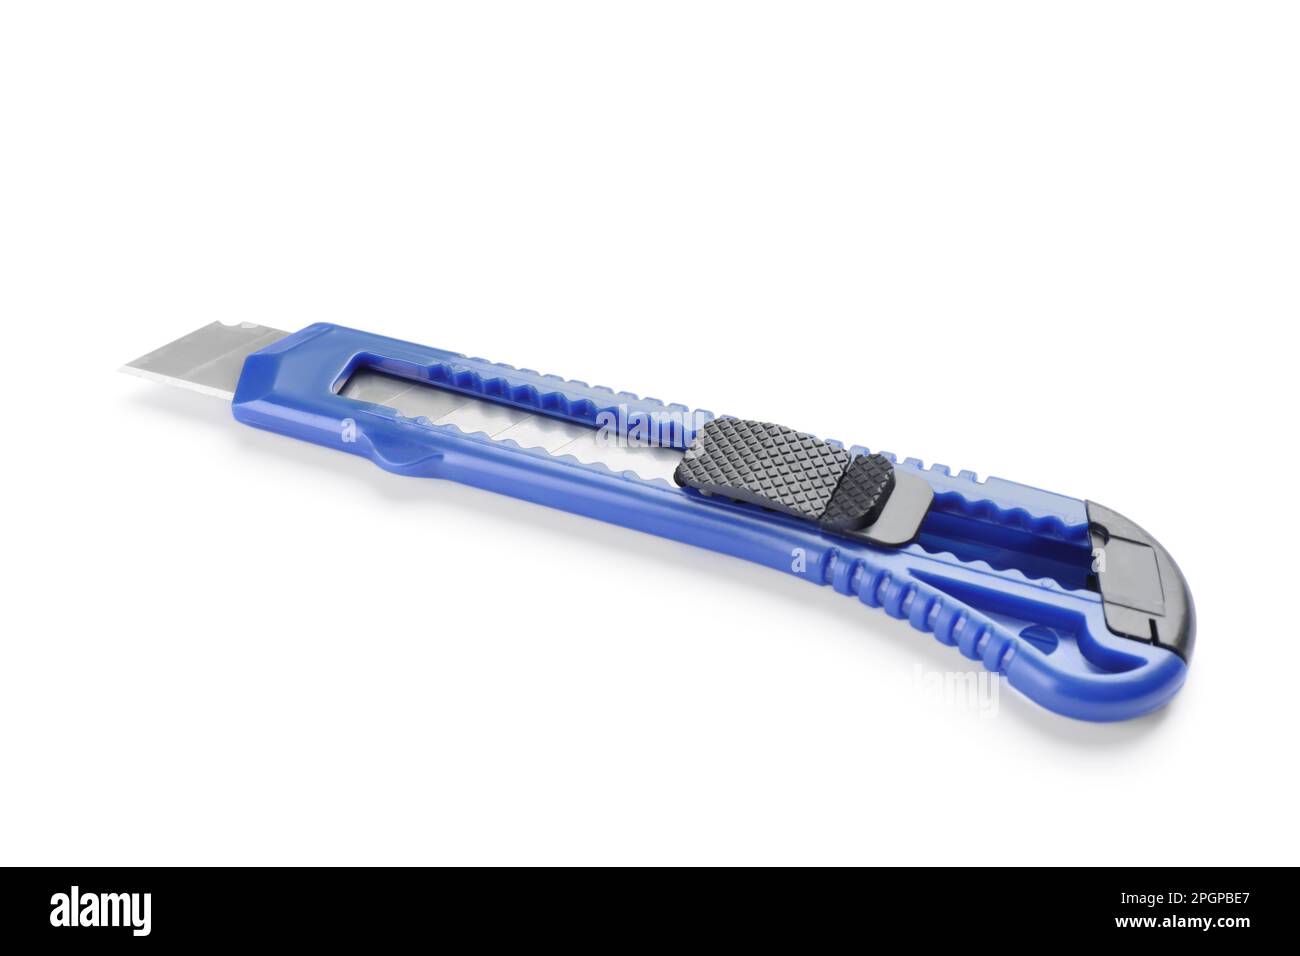 https://c8.alamy.com/comp/2PGPBE7/blue-utility-knife-isolated-on-white-construction-tool-2PGPBE7.jpg